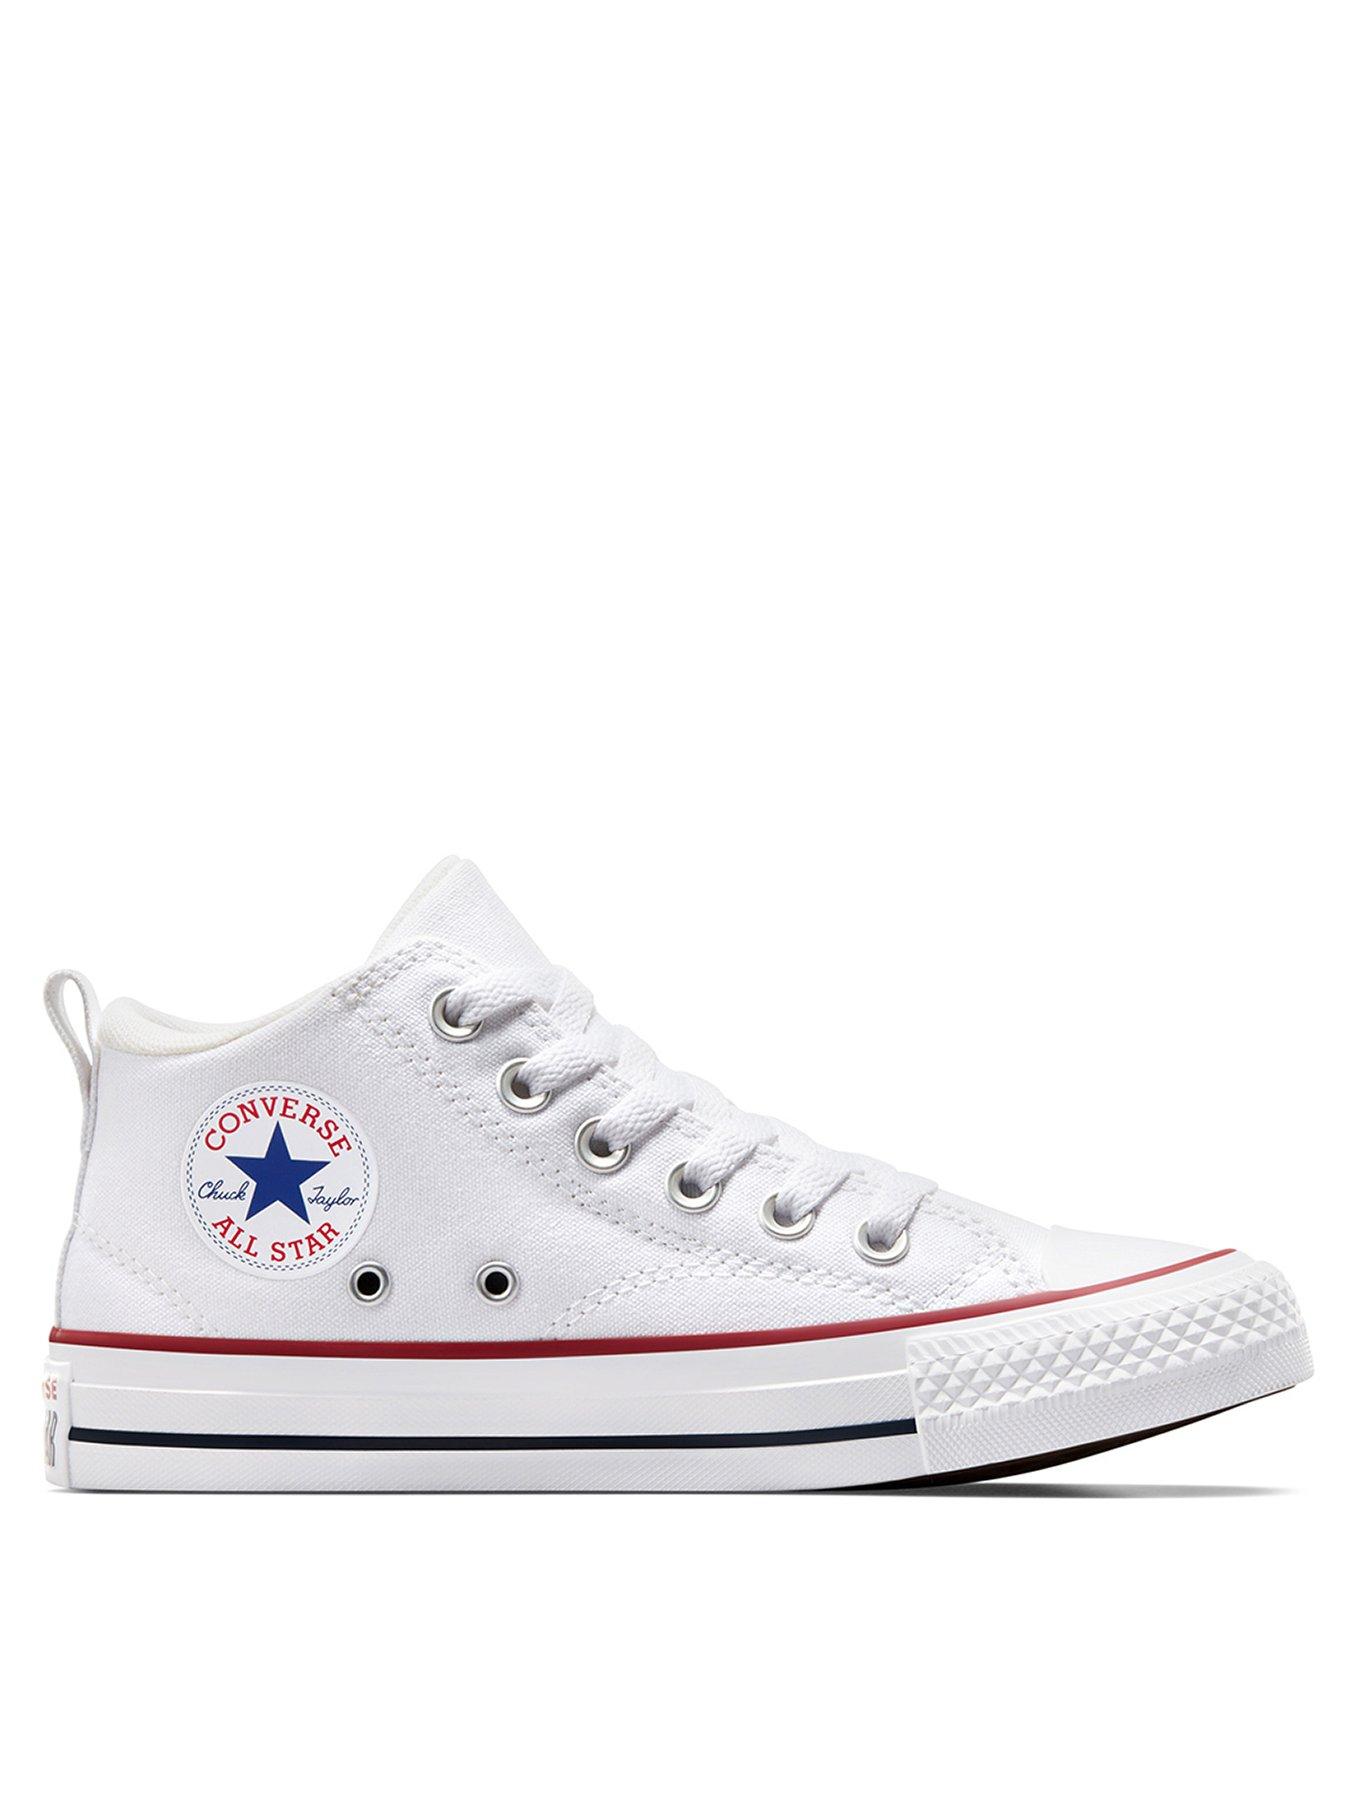 Stort univers Rige rigdom Converse Chuck Taylor All Star Malden Street Trainers - White |  littlewoods.com